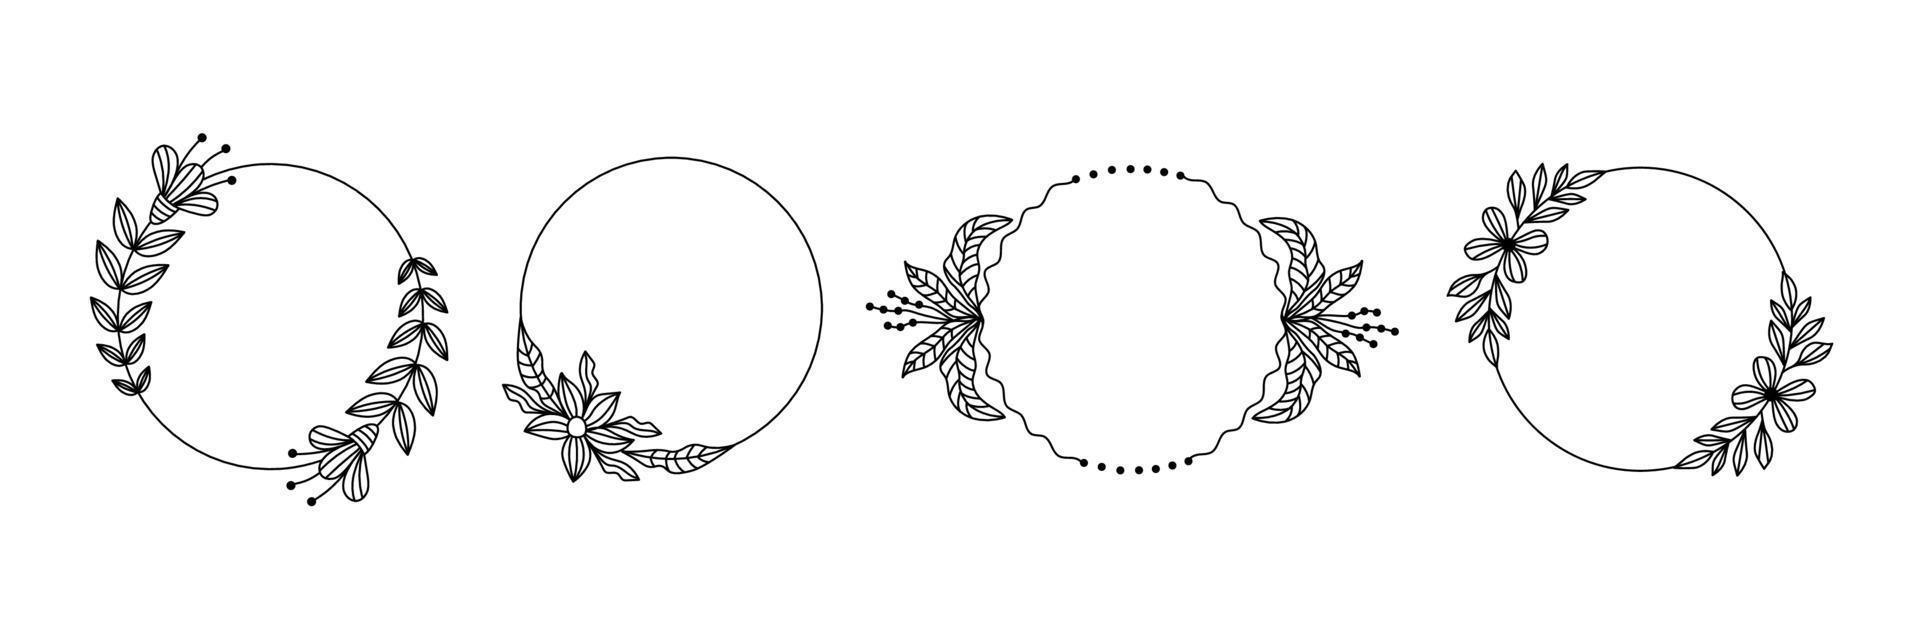 Circle Frames set with doodle flowers vector